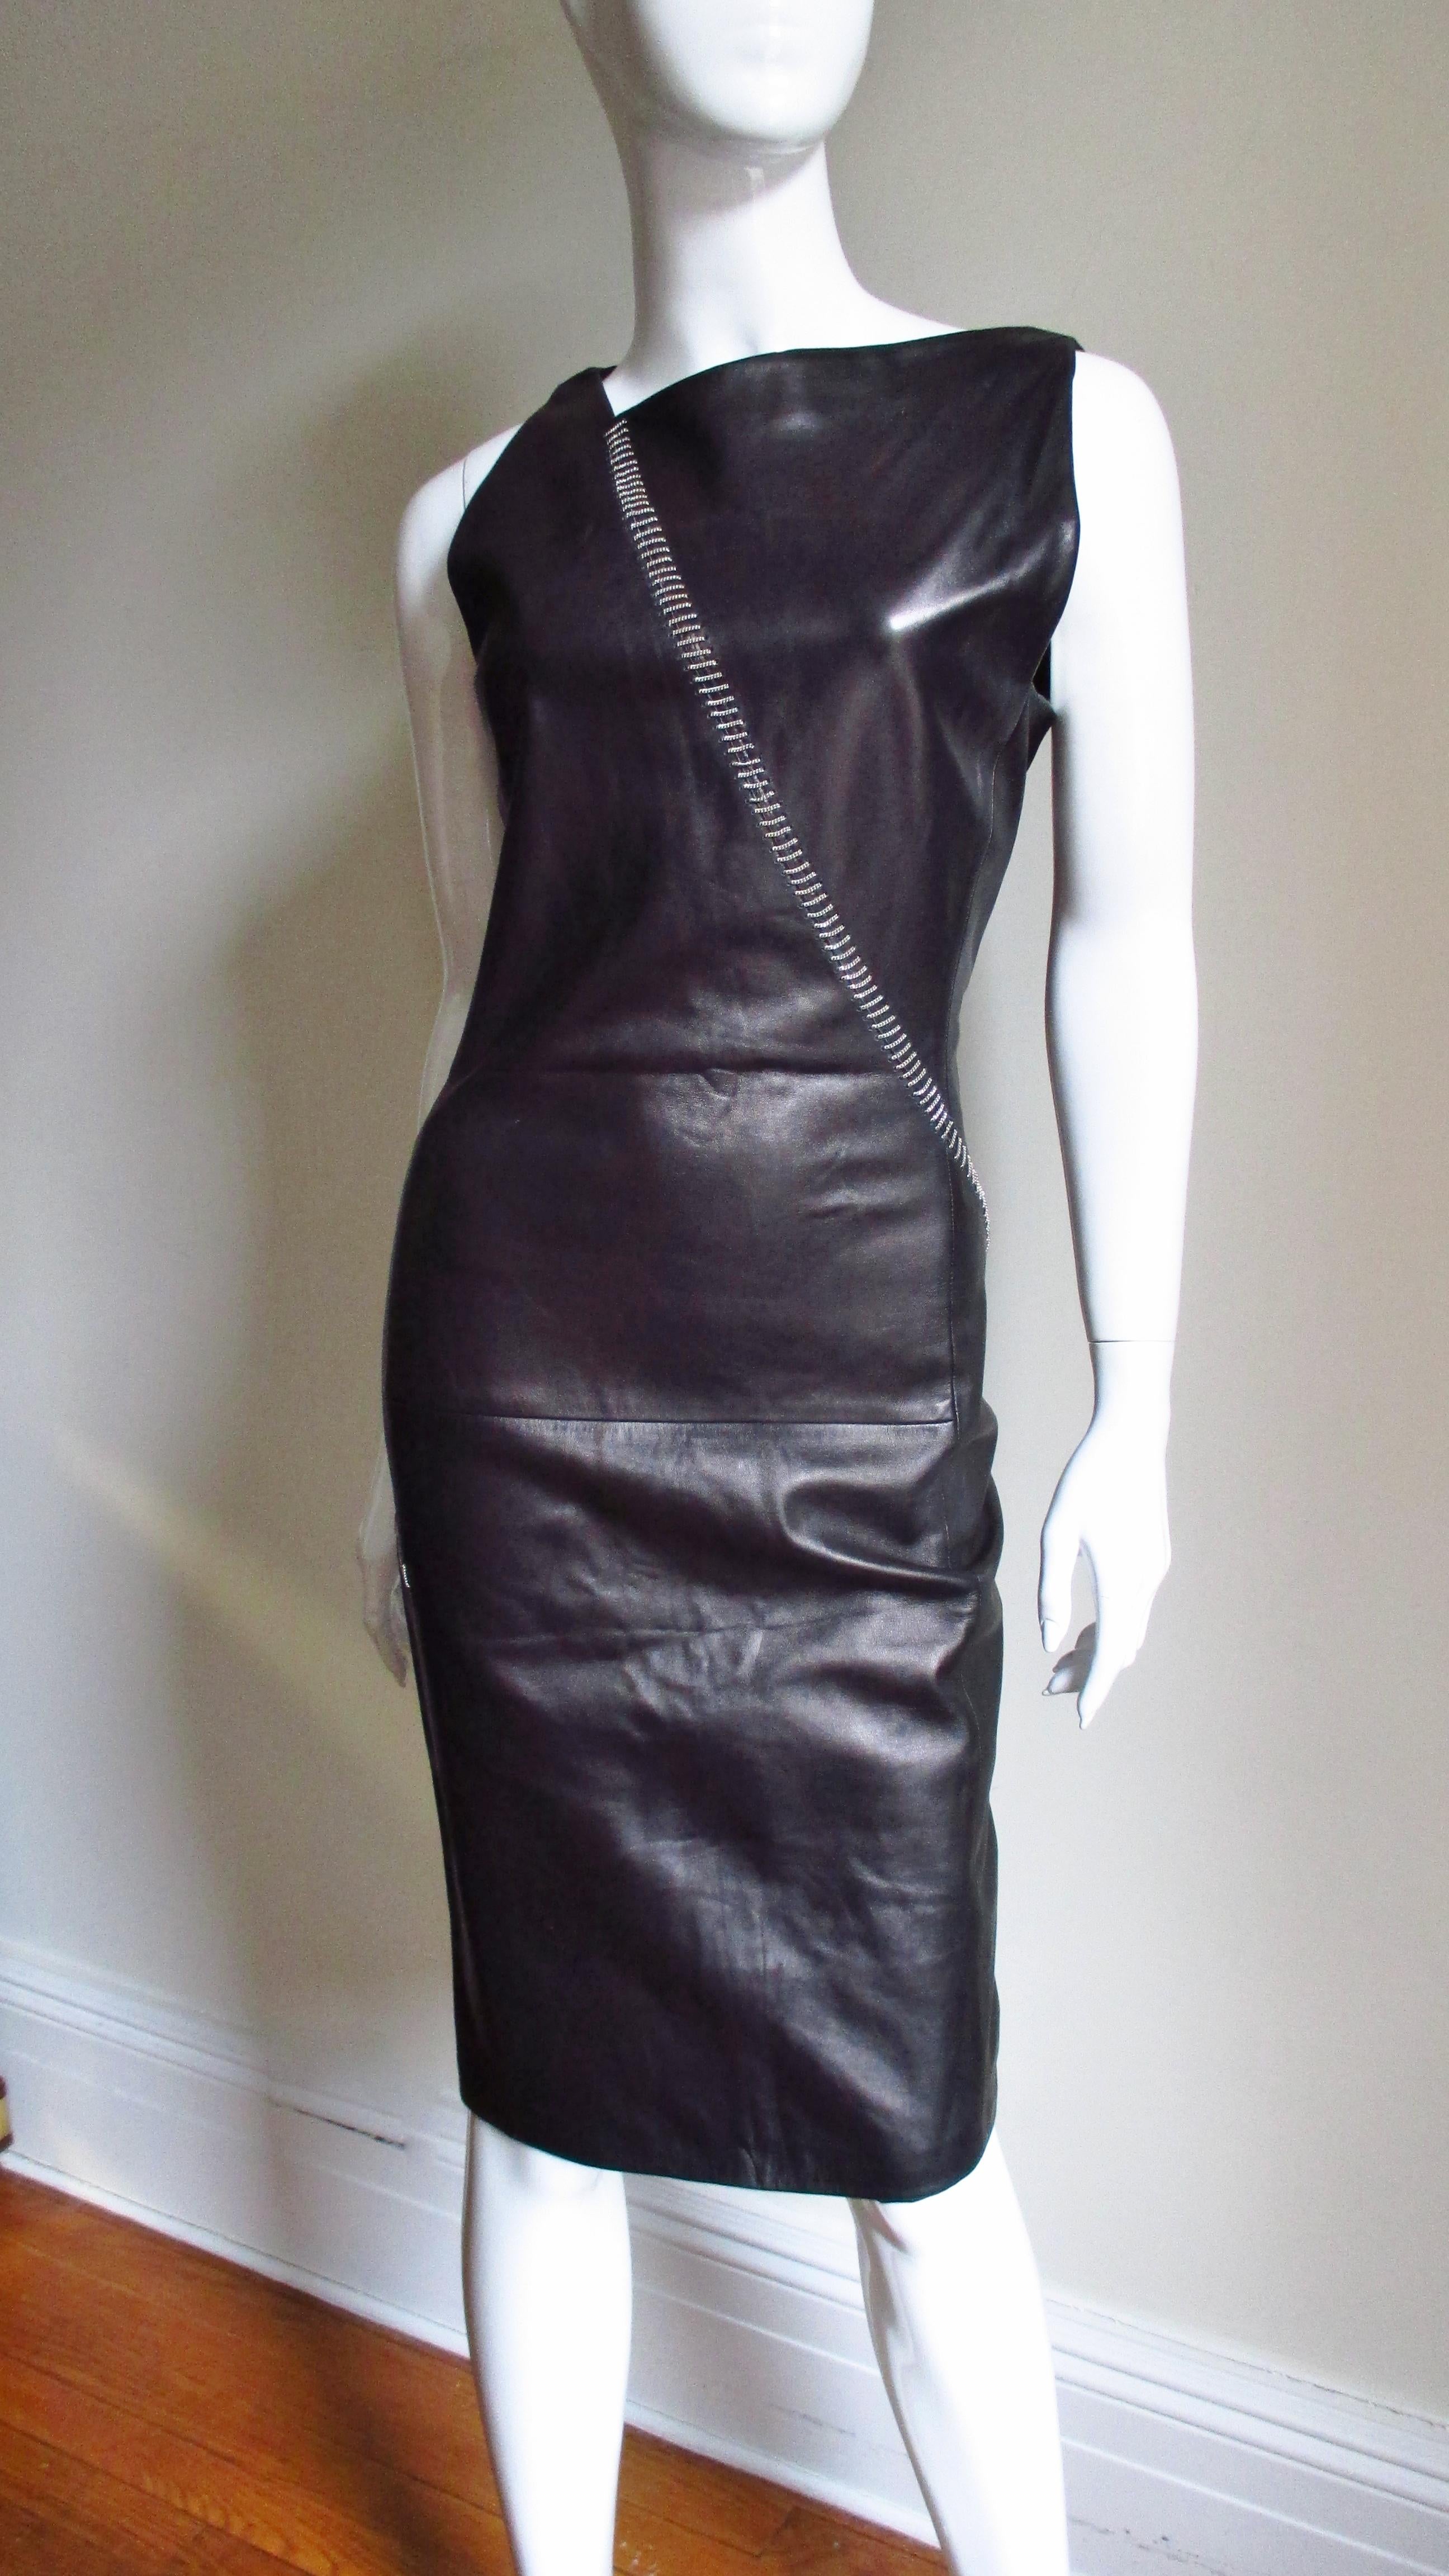 Black 1990s Gianni Versace Leather Dress with Chains